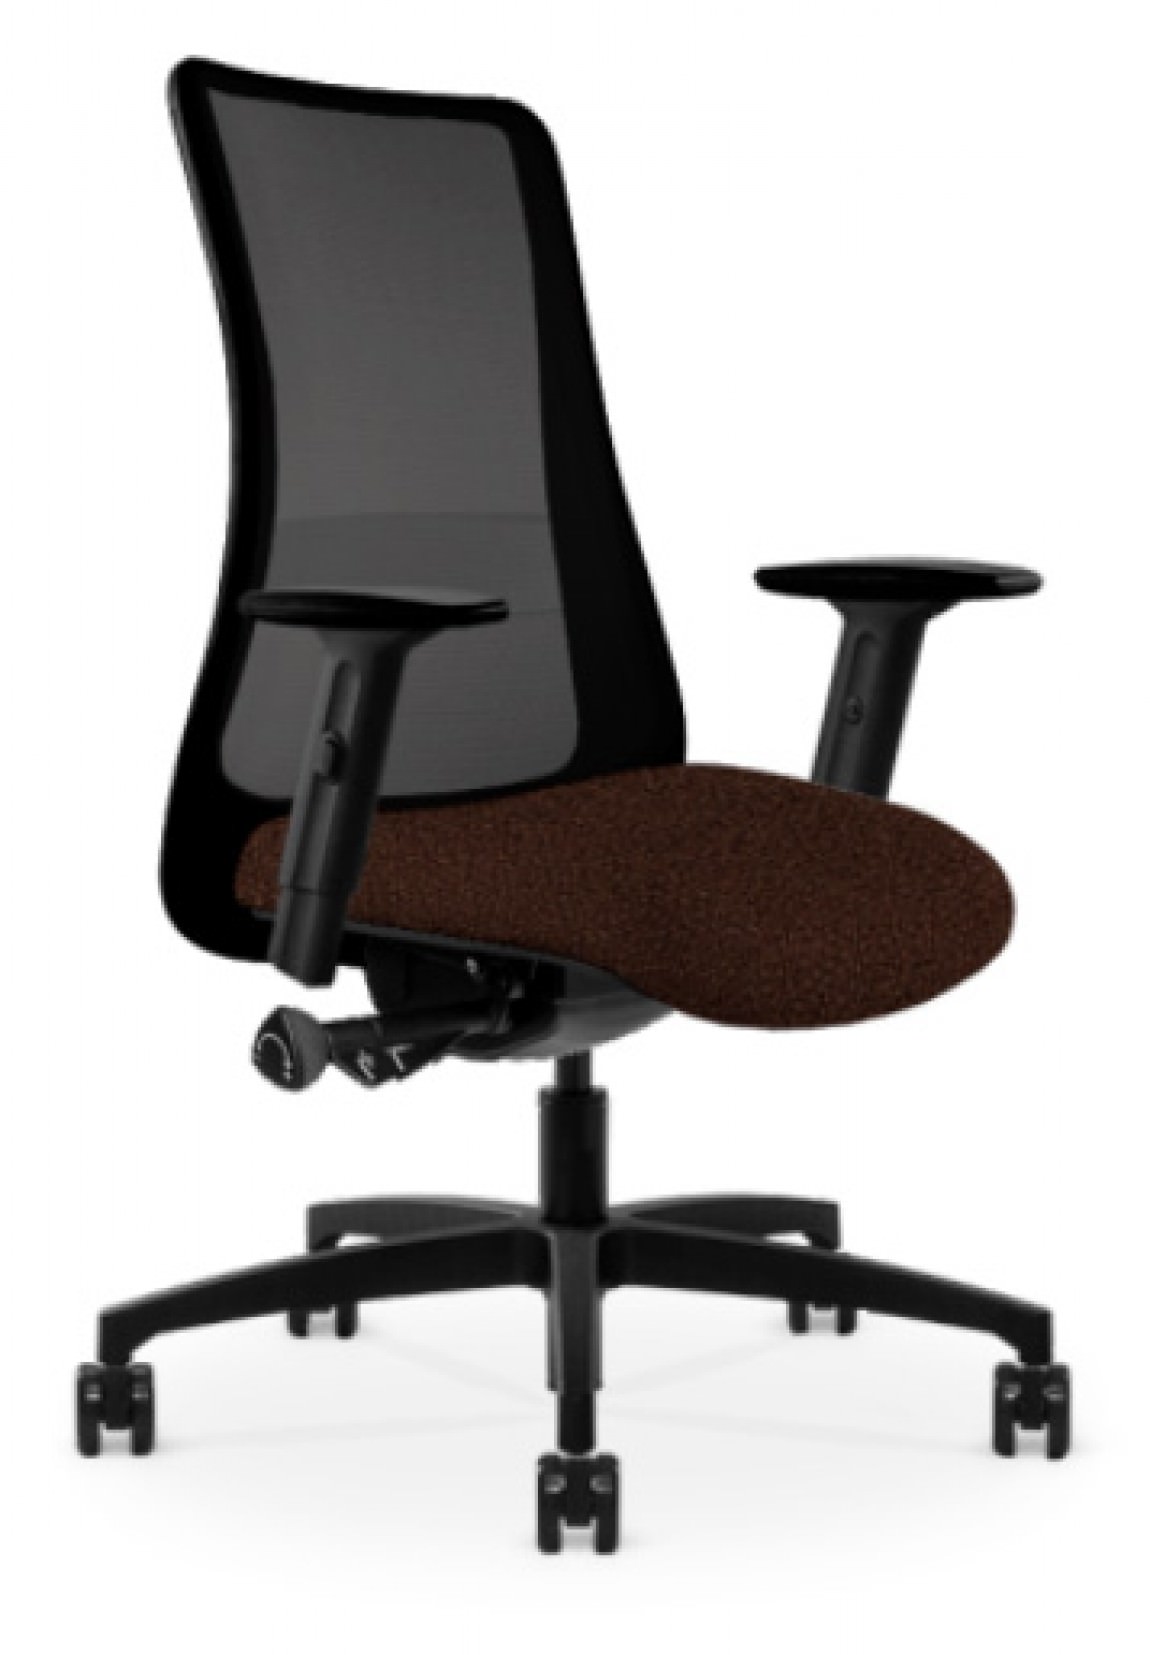 Black Copper Mesh Antimicrobial Office Chair w/ Cocoa Seat